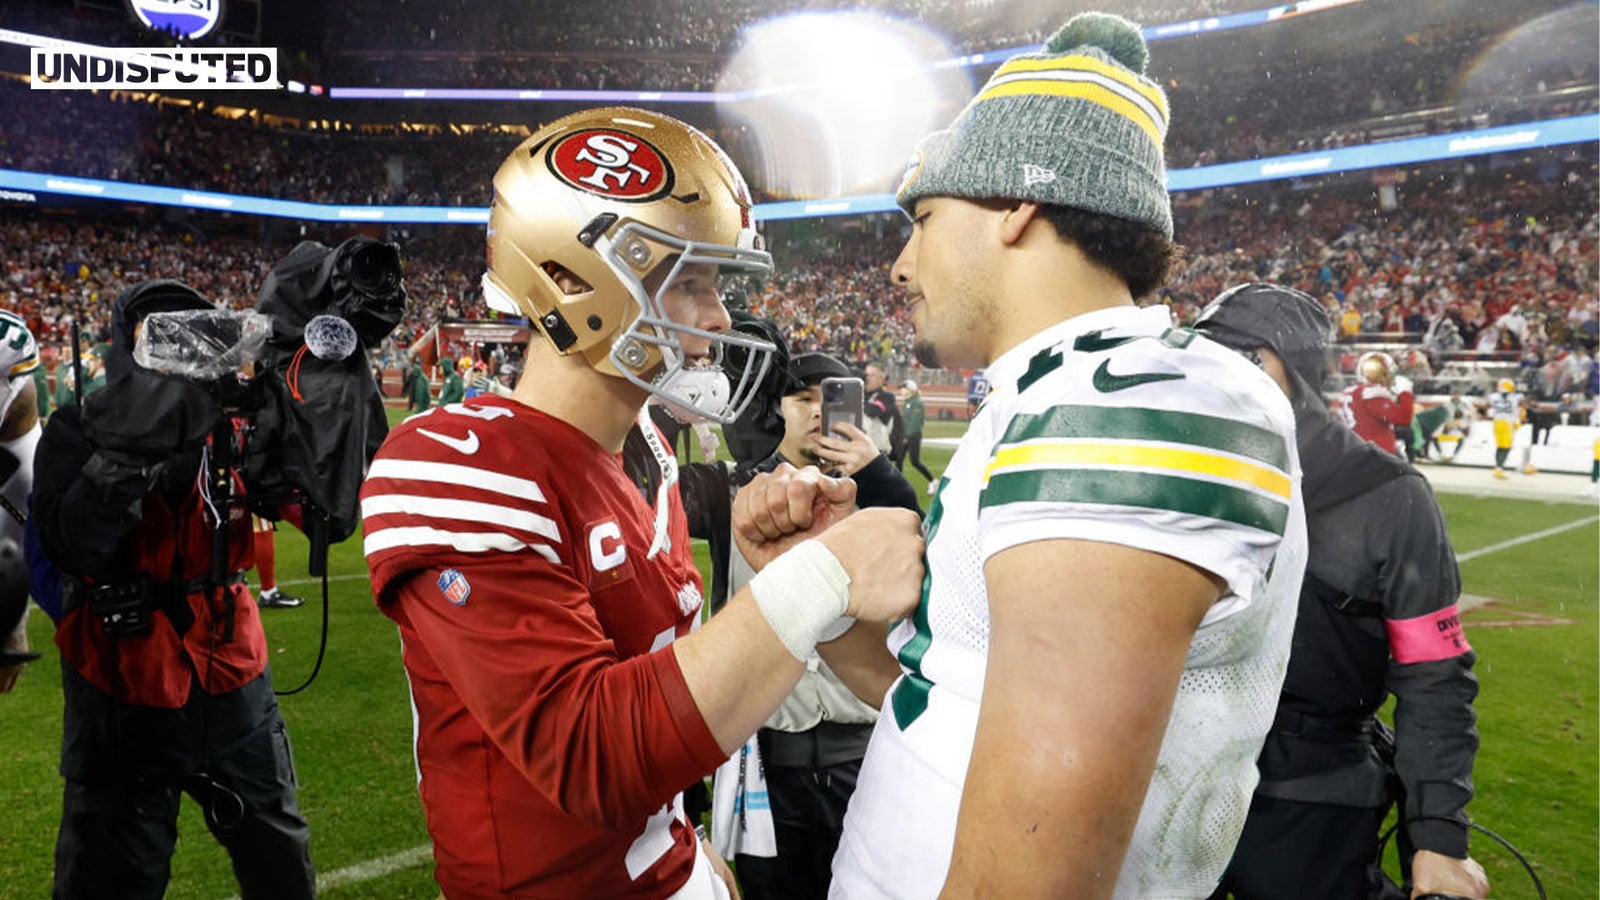 49ers pull off 4th quarter comeback in 24-21 Divisional Round win vs. Packers